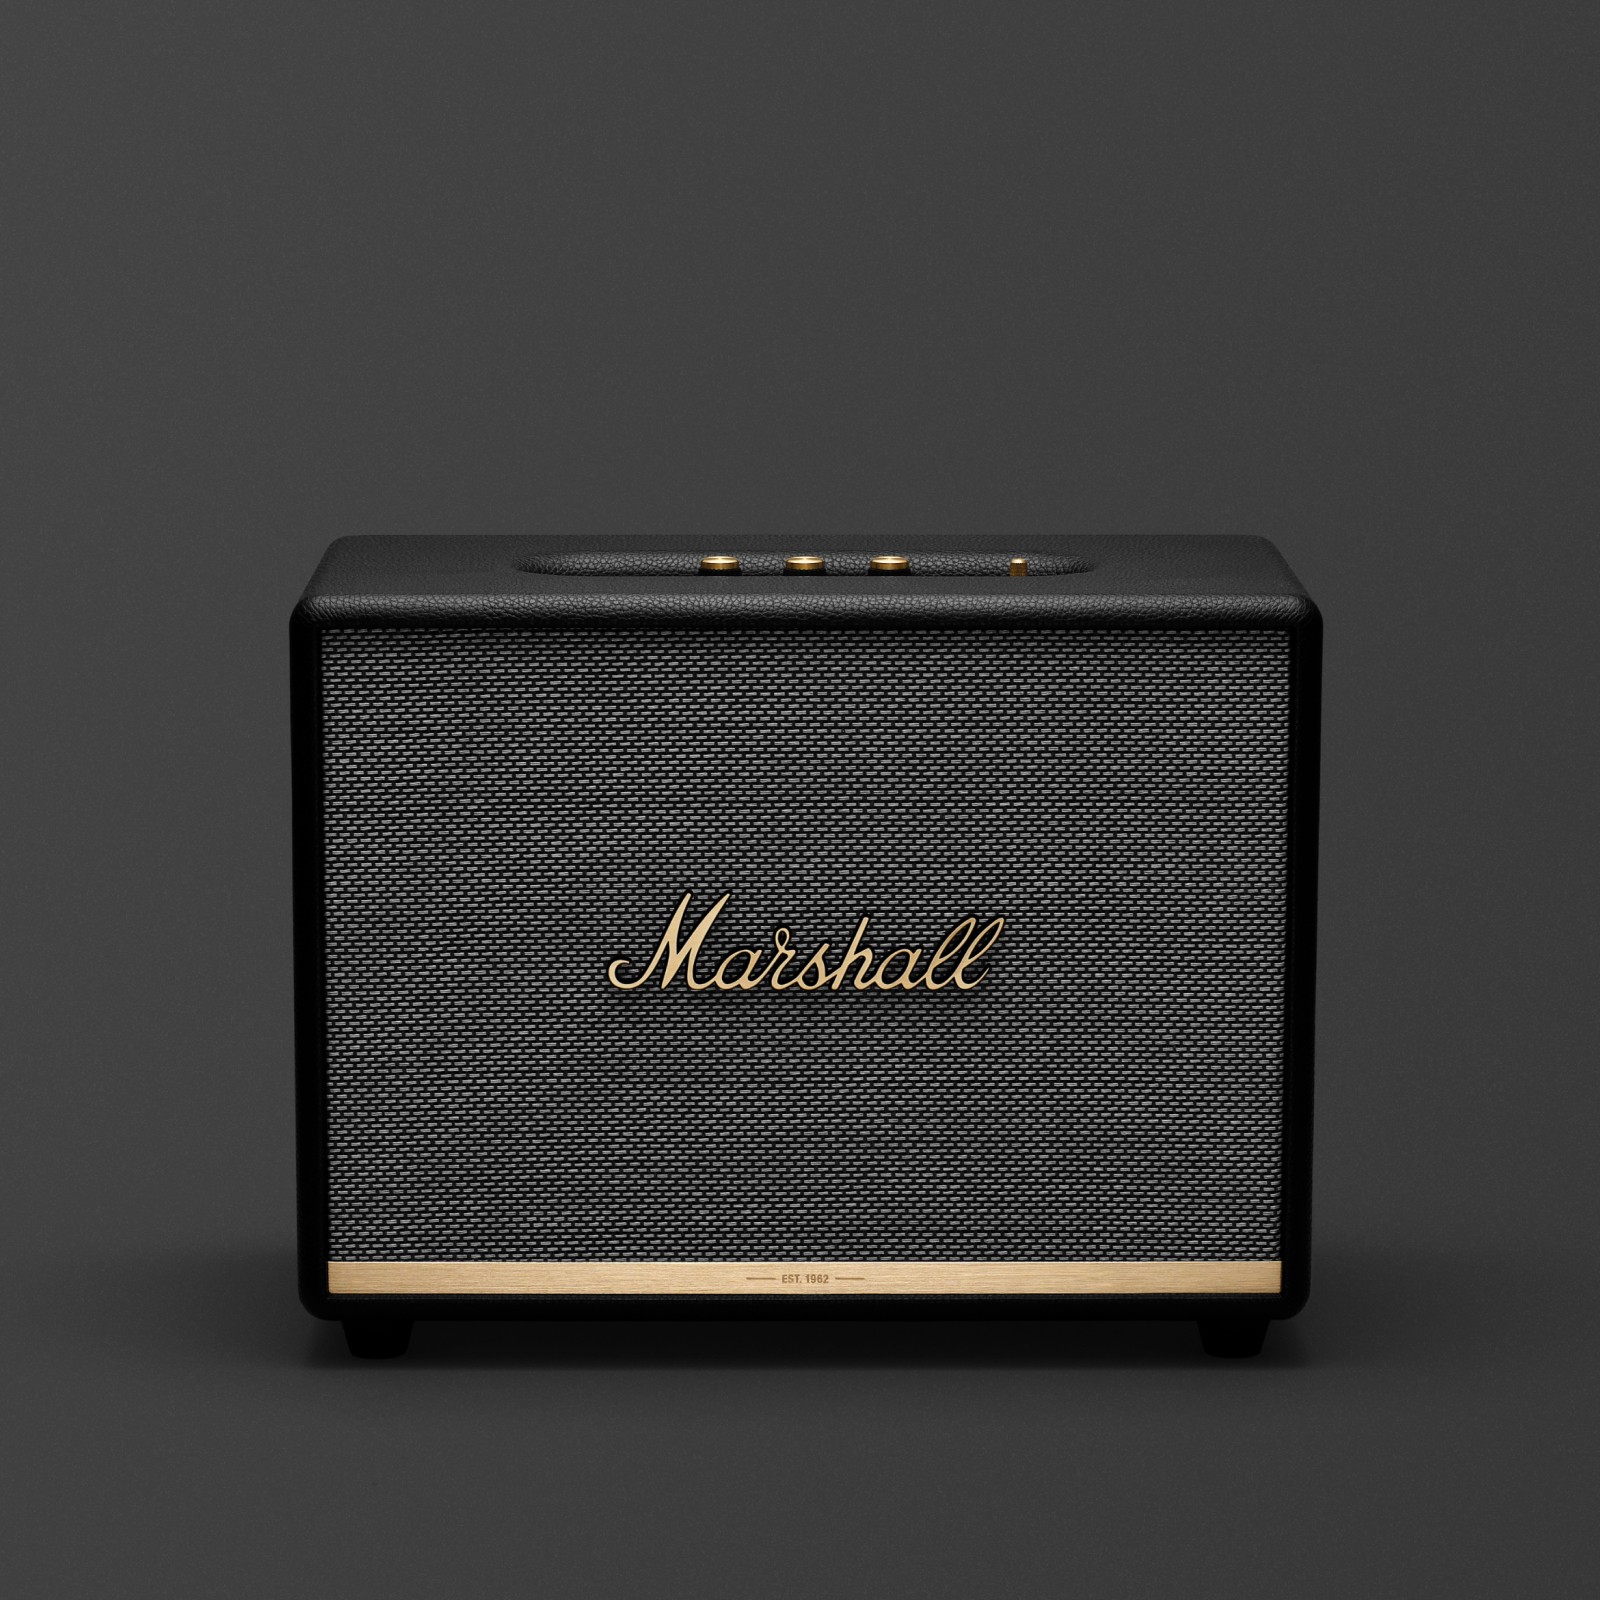 The front image of the Woburn II Black speaker.